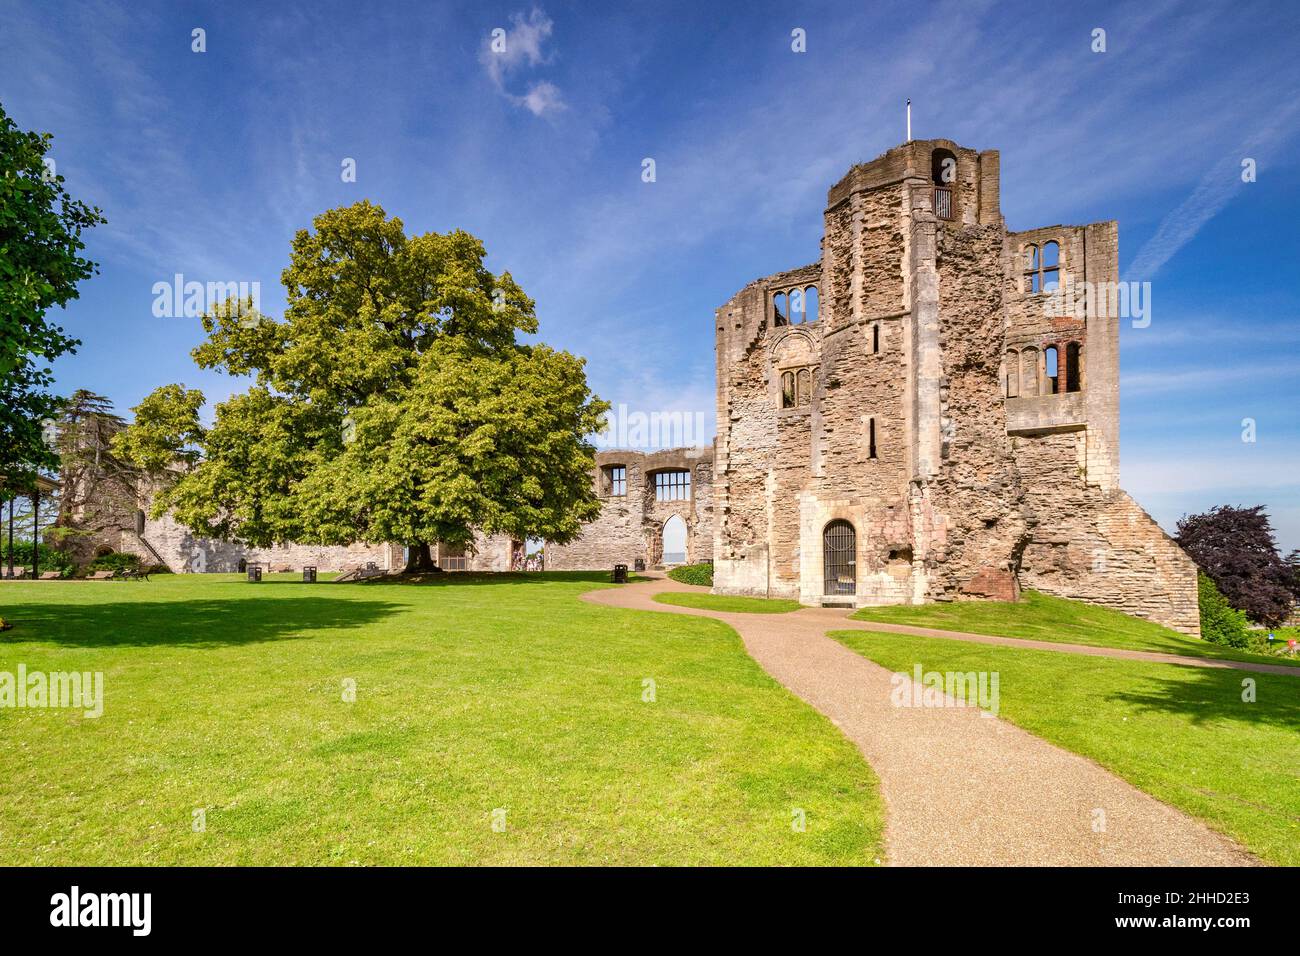 4 July 2019: Newark on Trent, Nottinghamshire, UK - The castle and grounds, freely open to the public. Leafy trees and green lawn. Stock Photo